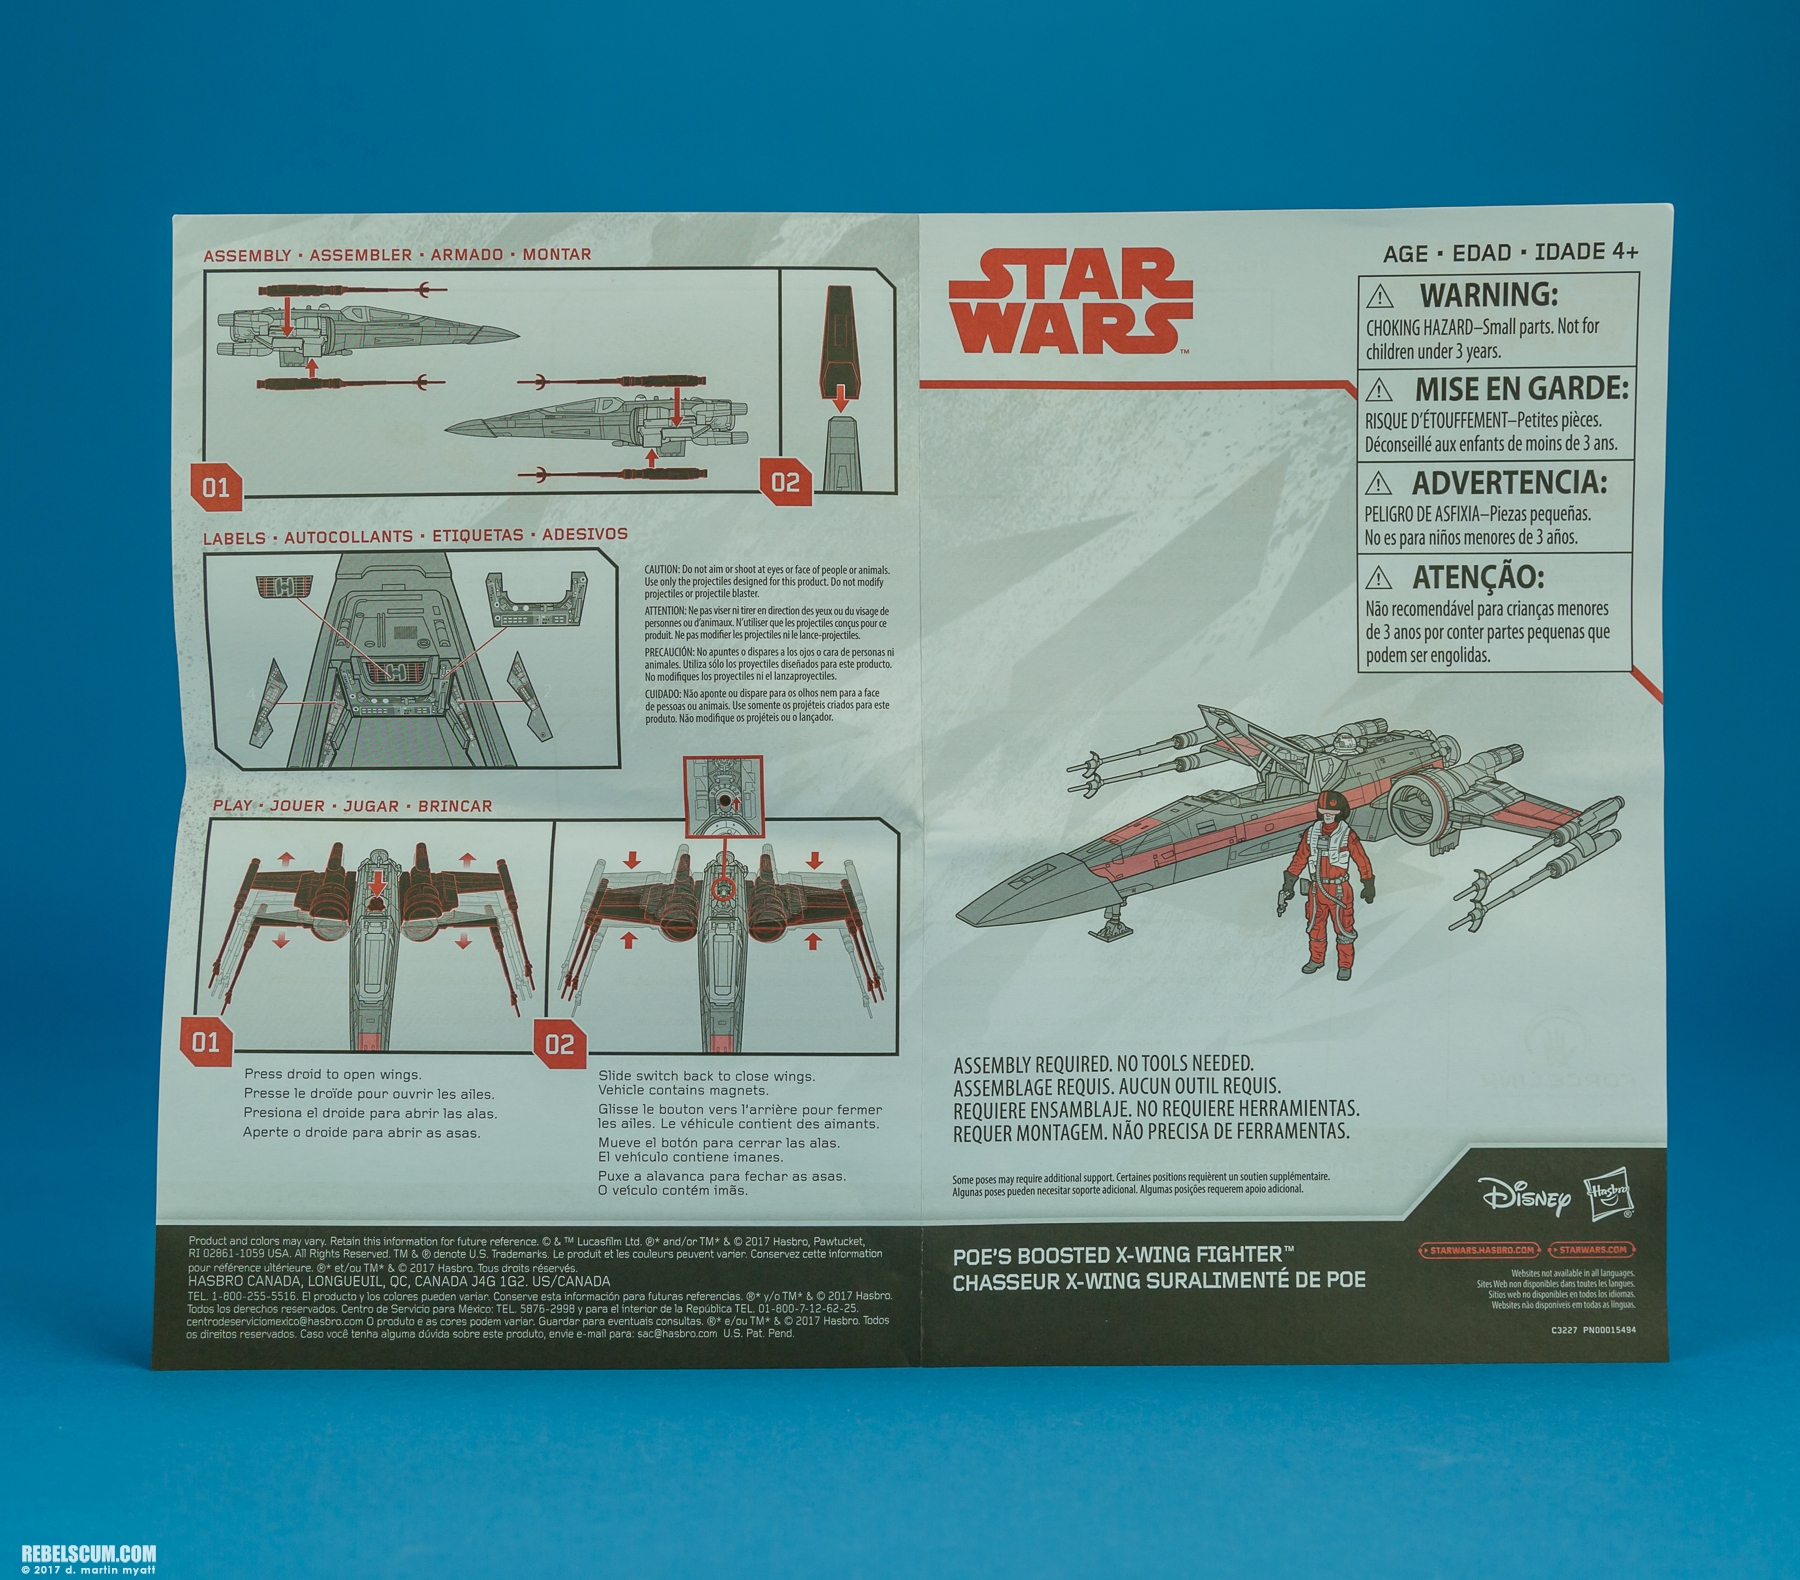 Poes-Boosted-X-Wing-Fighter-The-Last-Jedi-Hasbro-018.jpg